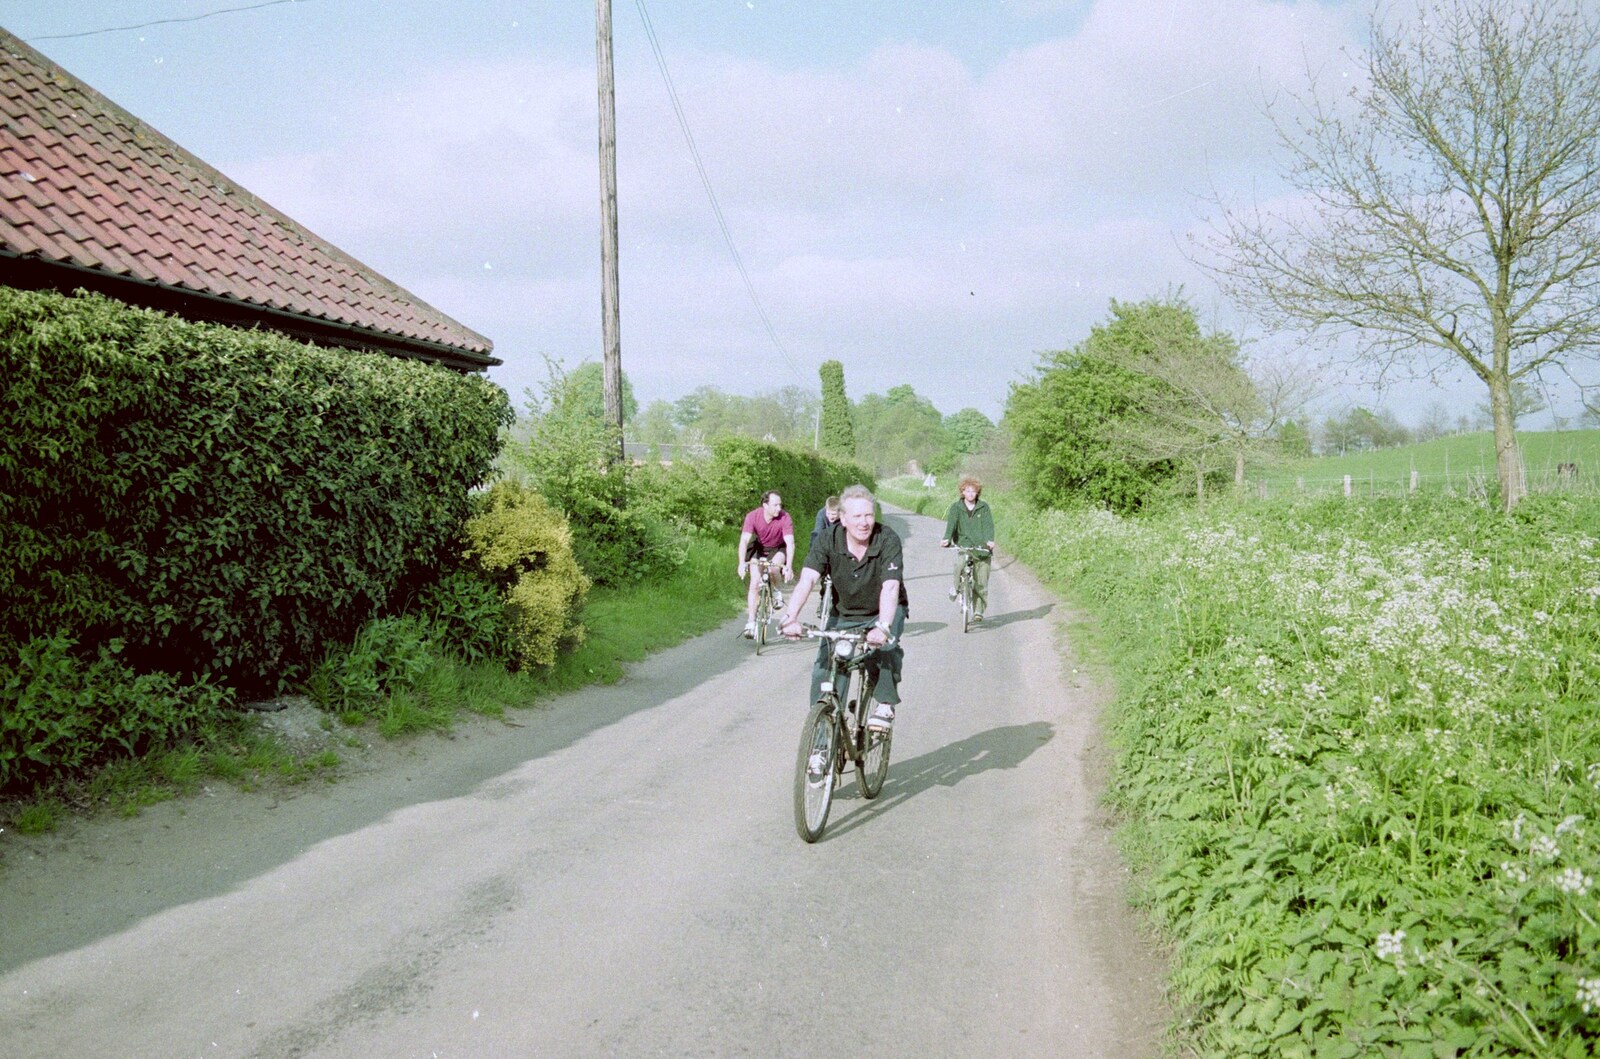 John willy from A BSCC Bike Ride, Brockdish Greyhound and Hoxne Swan, Suffolk - 4th May 2000